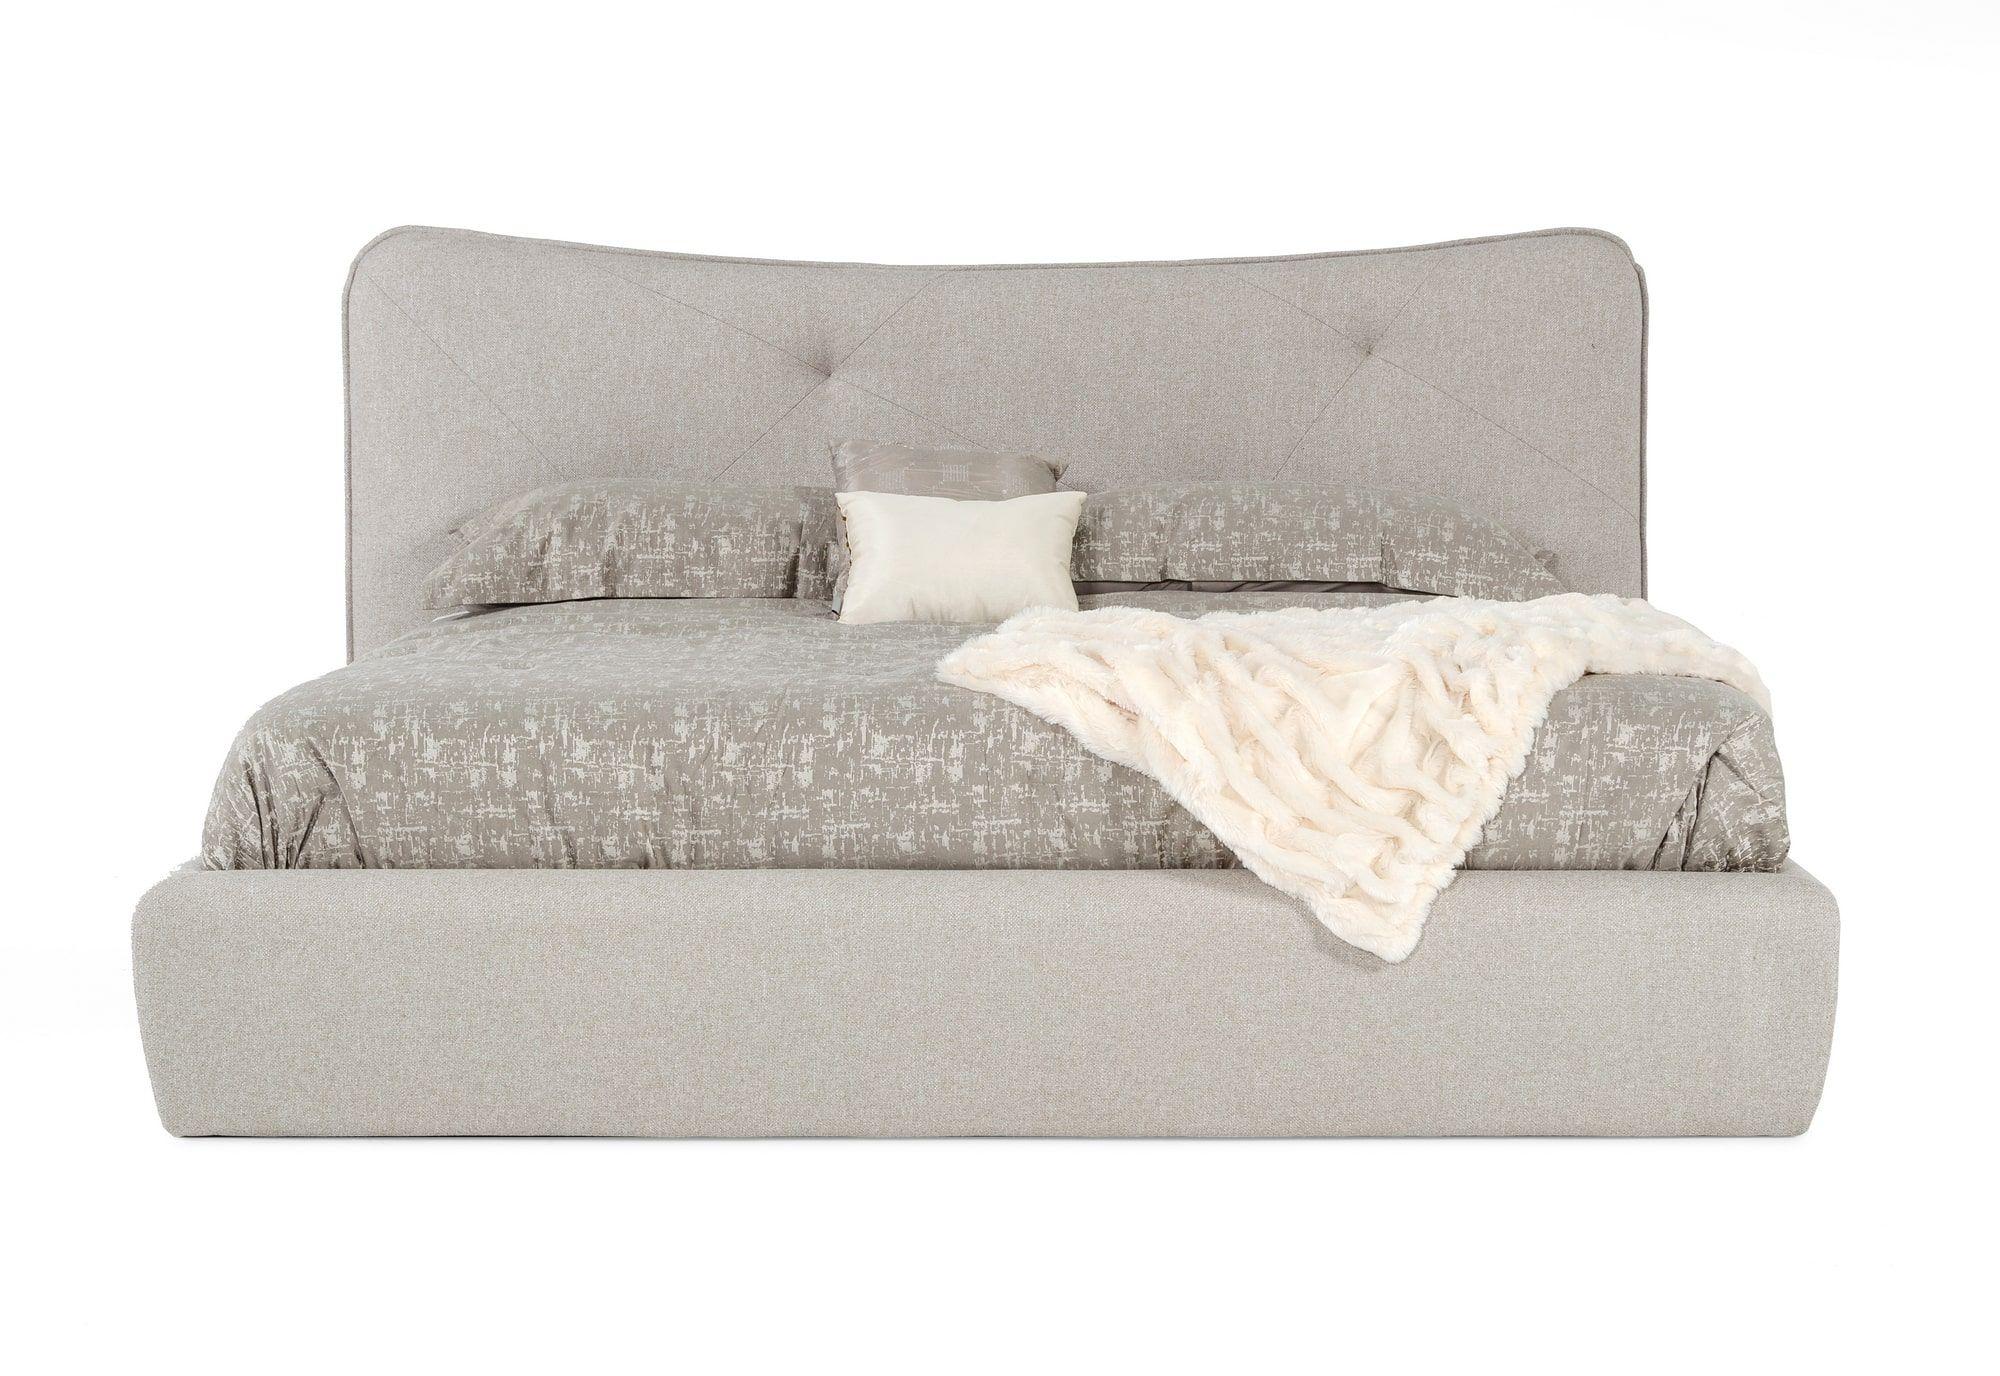 

    
Light Grey Upholstered King Bed Modrest Alessia VIG Modern MADE IN ITALY
